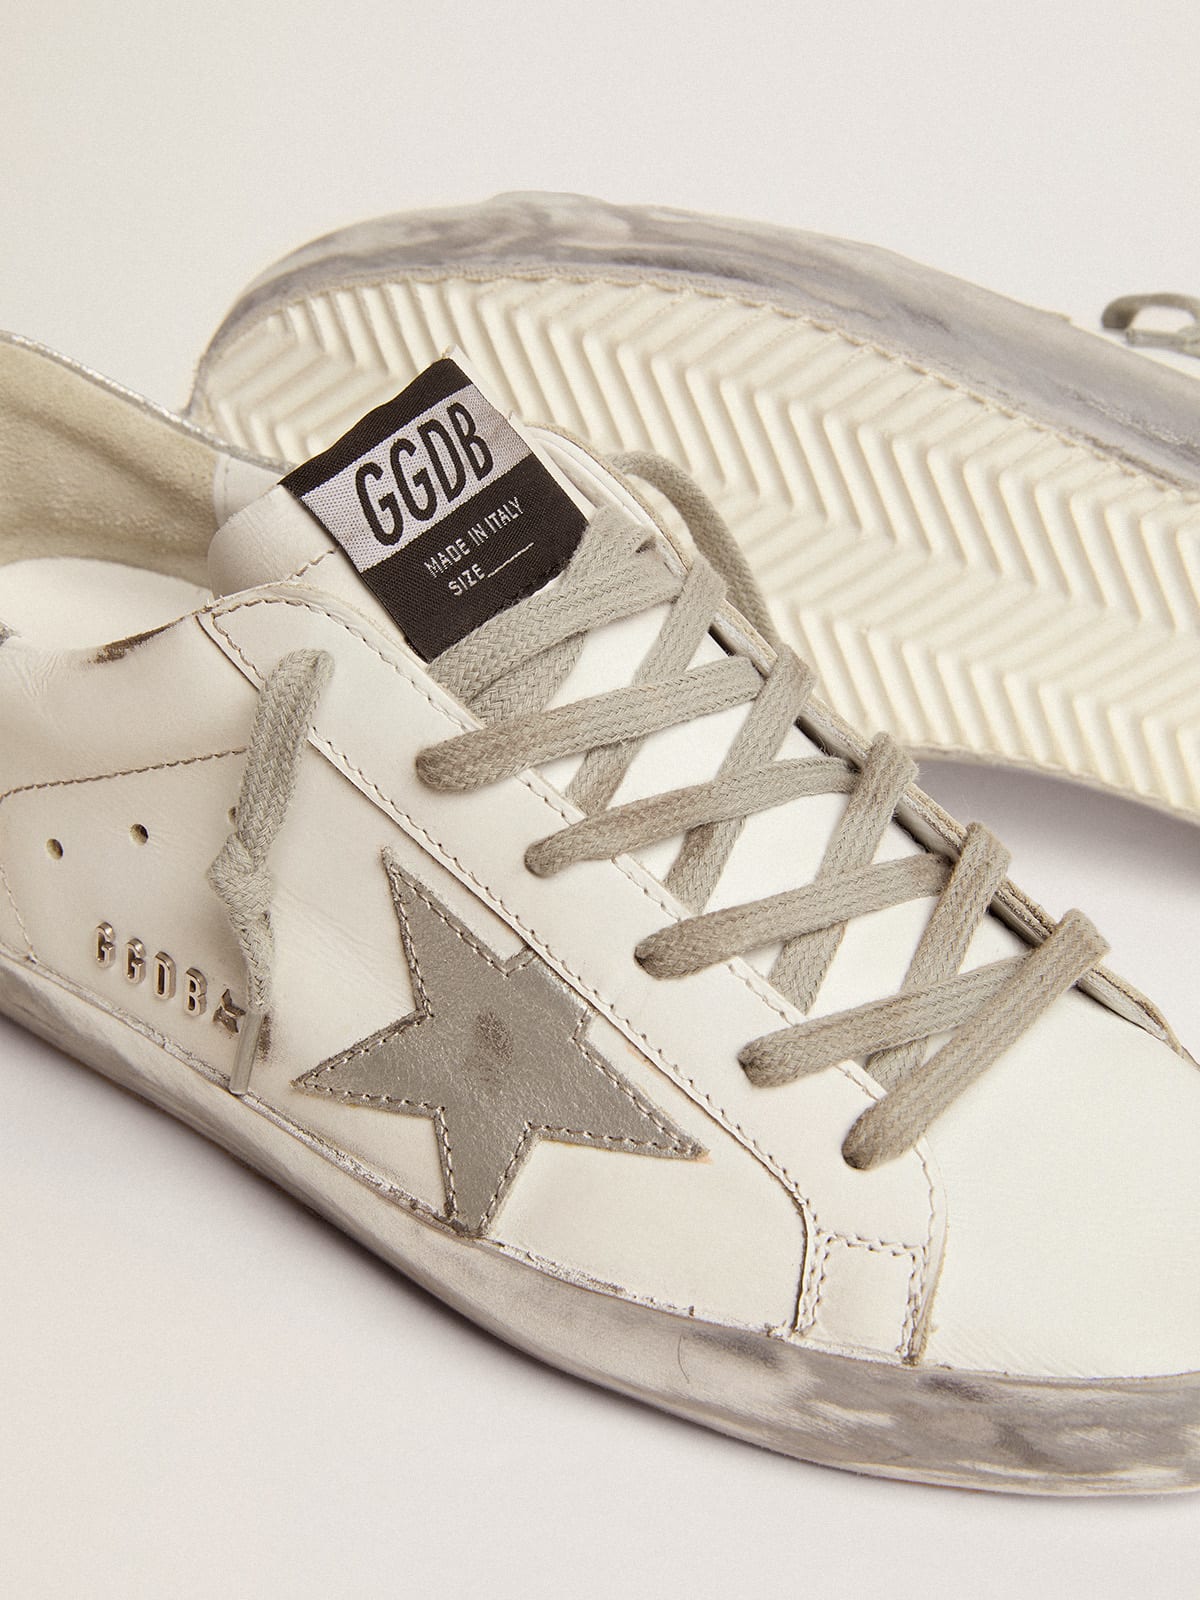 Golden Goose - Super-Star Donna con foxing sparkle argento e metal studs lettering in 